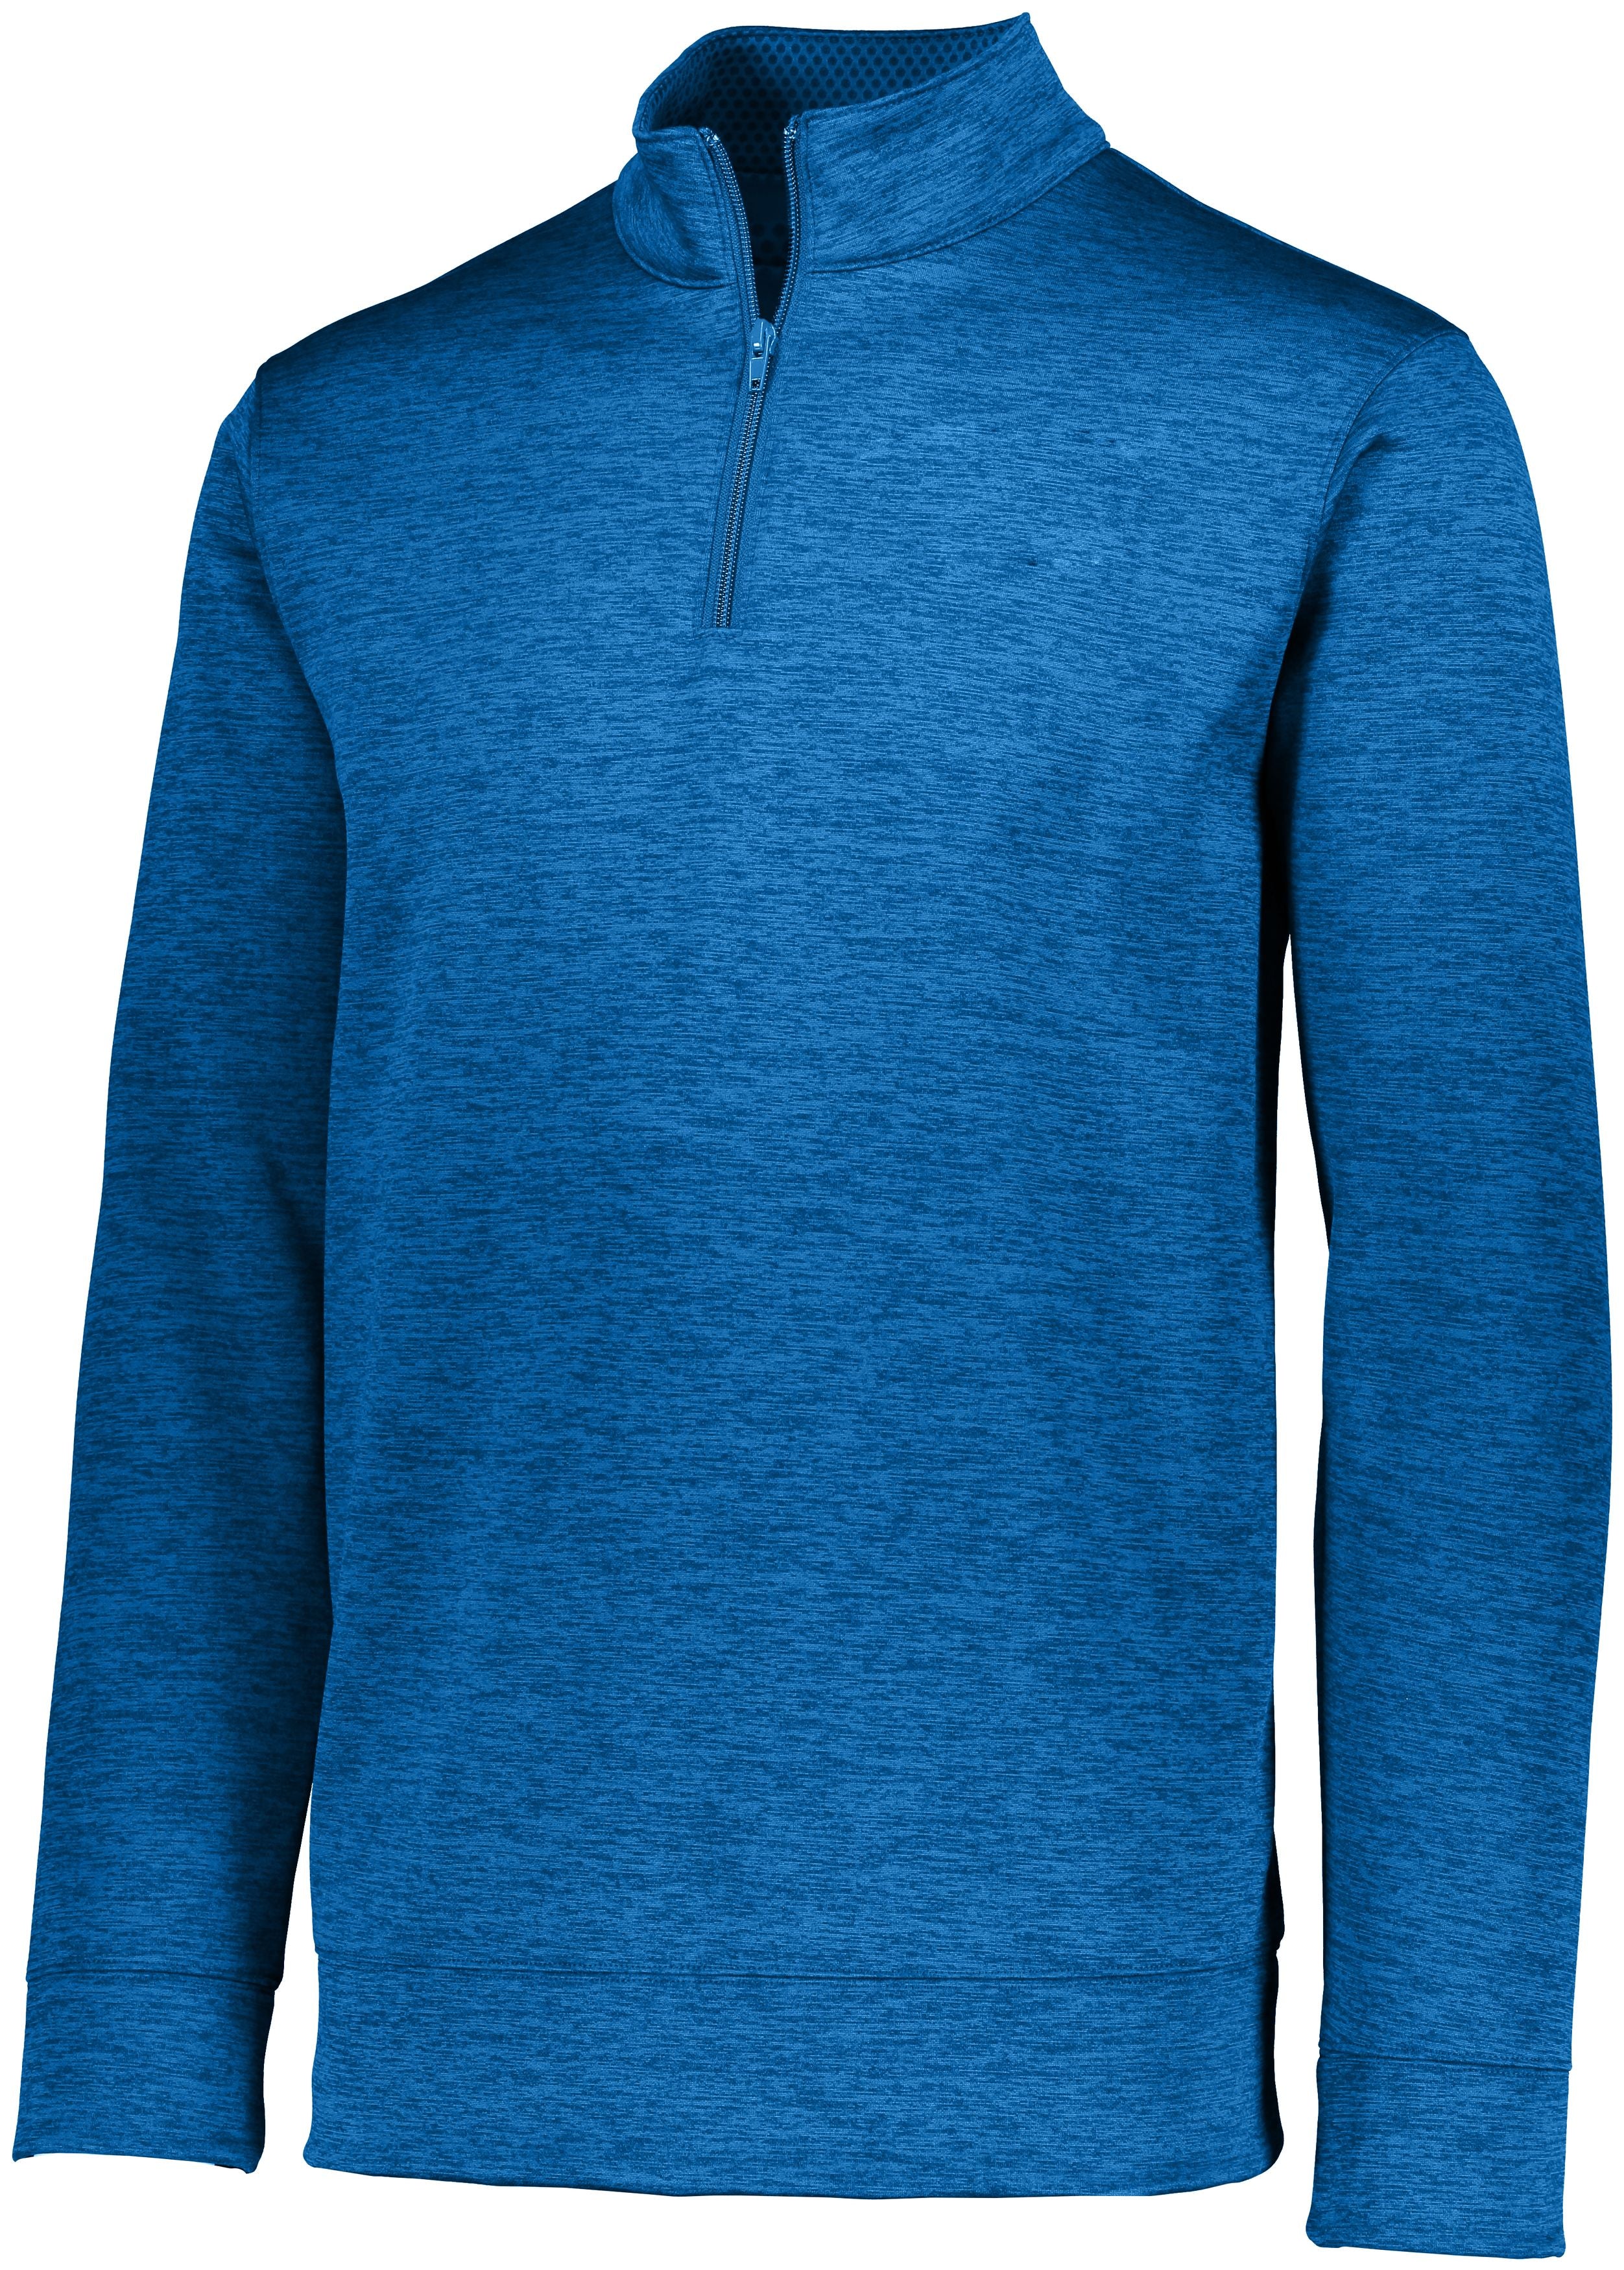 Augusta Sportswear Stoked Tonal Heather Pullover in Royal  -Part of the Adult, Adult-Pullover, Augusta-Products, Outerwear, Tonal-Fleece-Collection product lines at KanaleyCreations.com